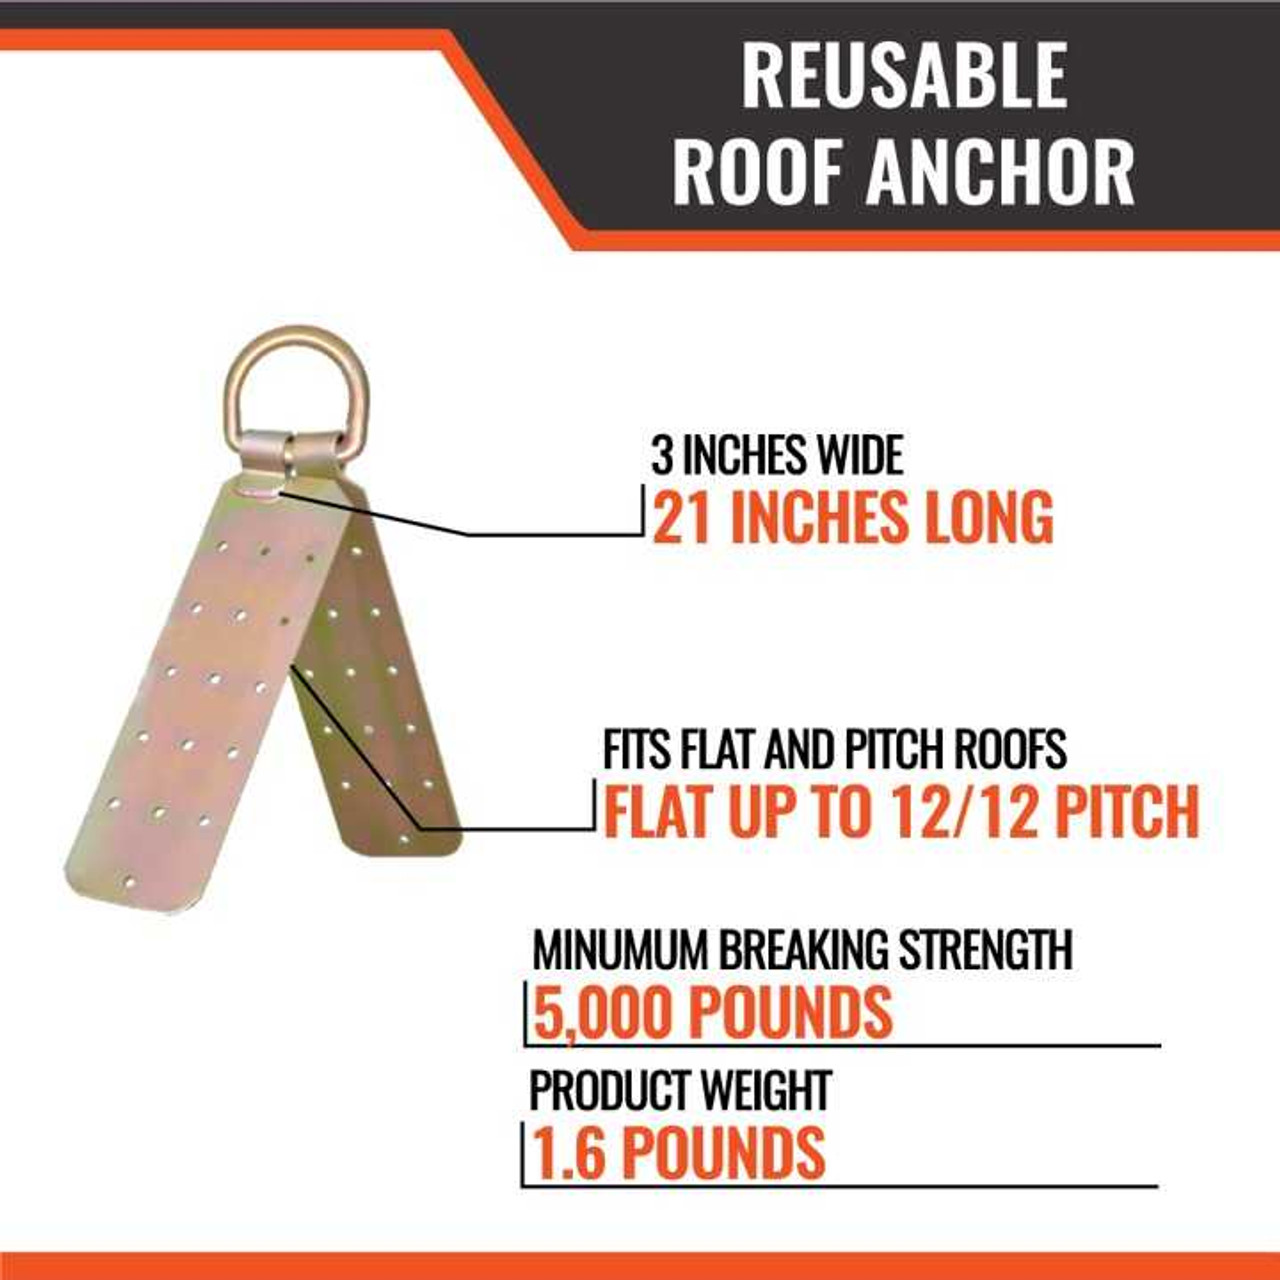 Fall Protection Standing Seam Roof Anchor Clamp with 360° Swivel Point |  Fall Arrest Roofing Harness Safety Kit | Aluminum Alloy Anchor | OSHA/ANSI